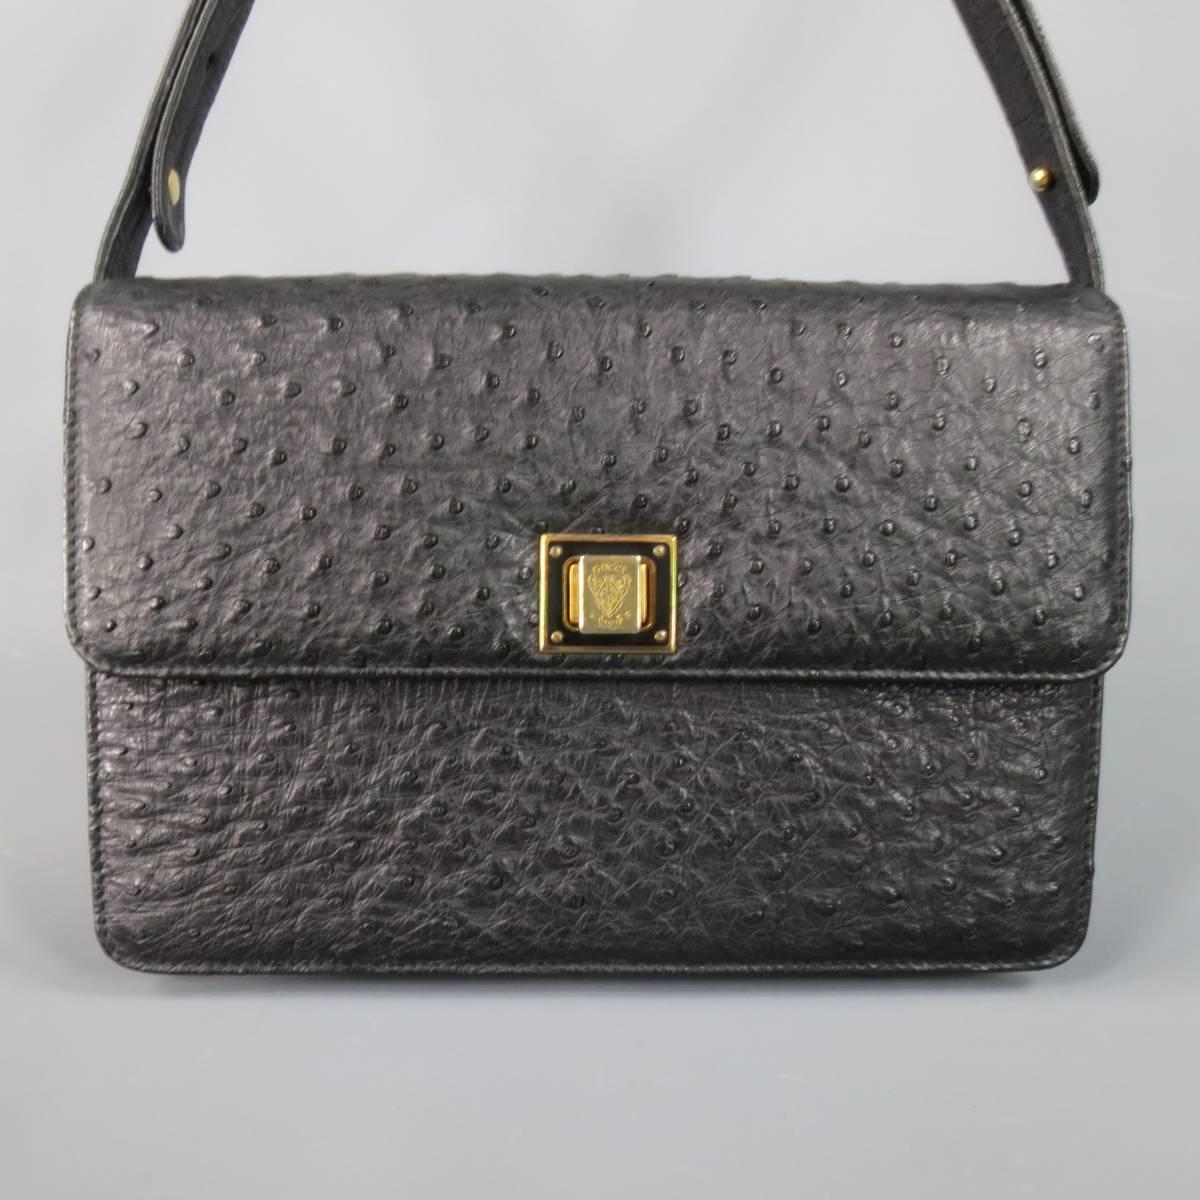 This fabulous and rare vintage GUCCI handbag comes in semi matte black ostrich textured leather and features a classic structured rectangle shape, flap closure with gold tone crest logo engraved twist closure, leather interior, and adjustable